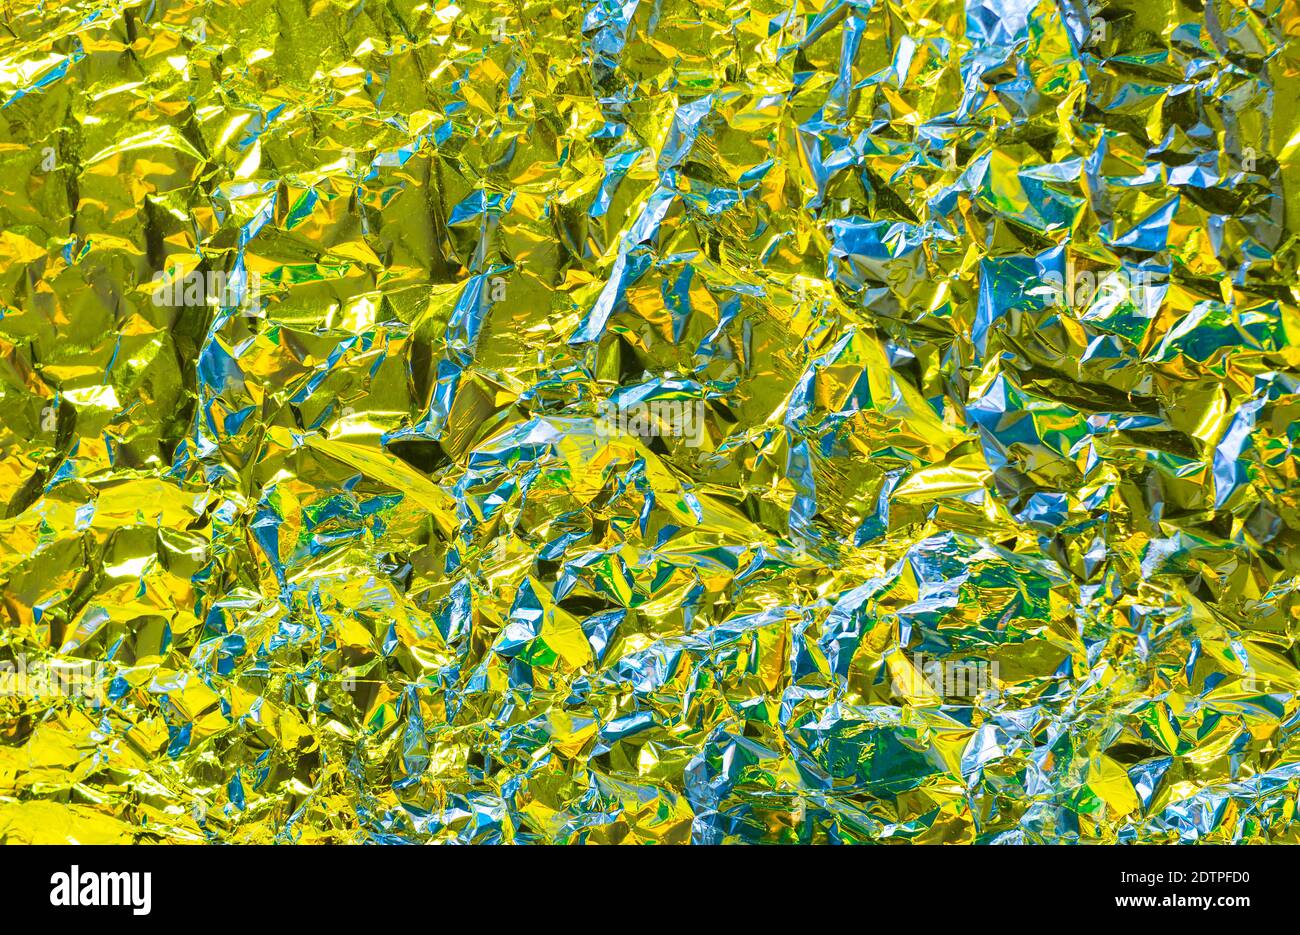 Metal chrome wrinkle texture with yellow tint and glance effect and crumpled structure with holographic iridescent effect with lime illuminating brigh Stock Photo